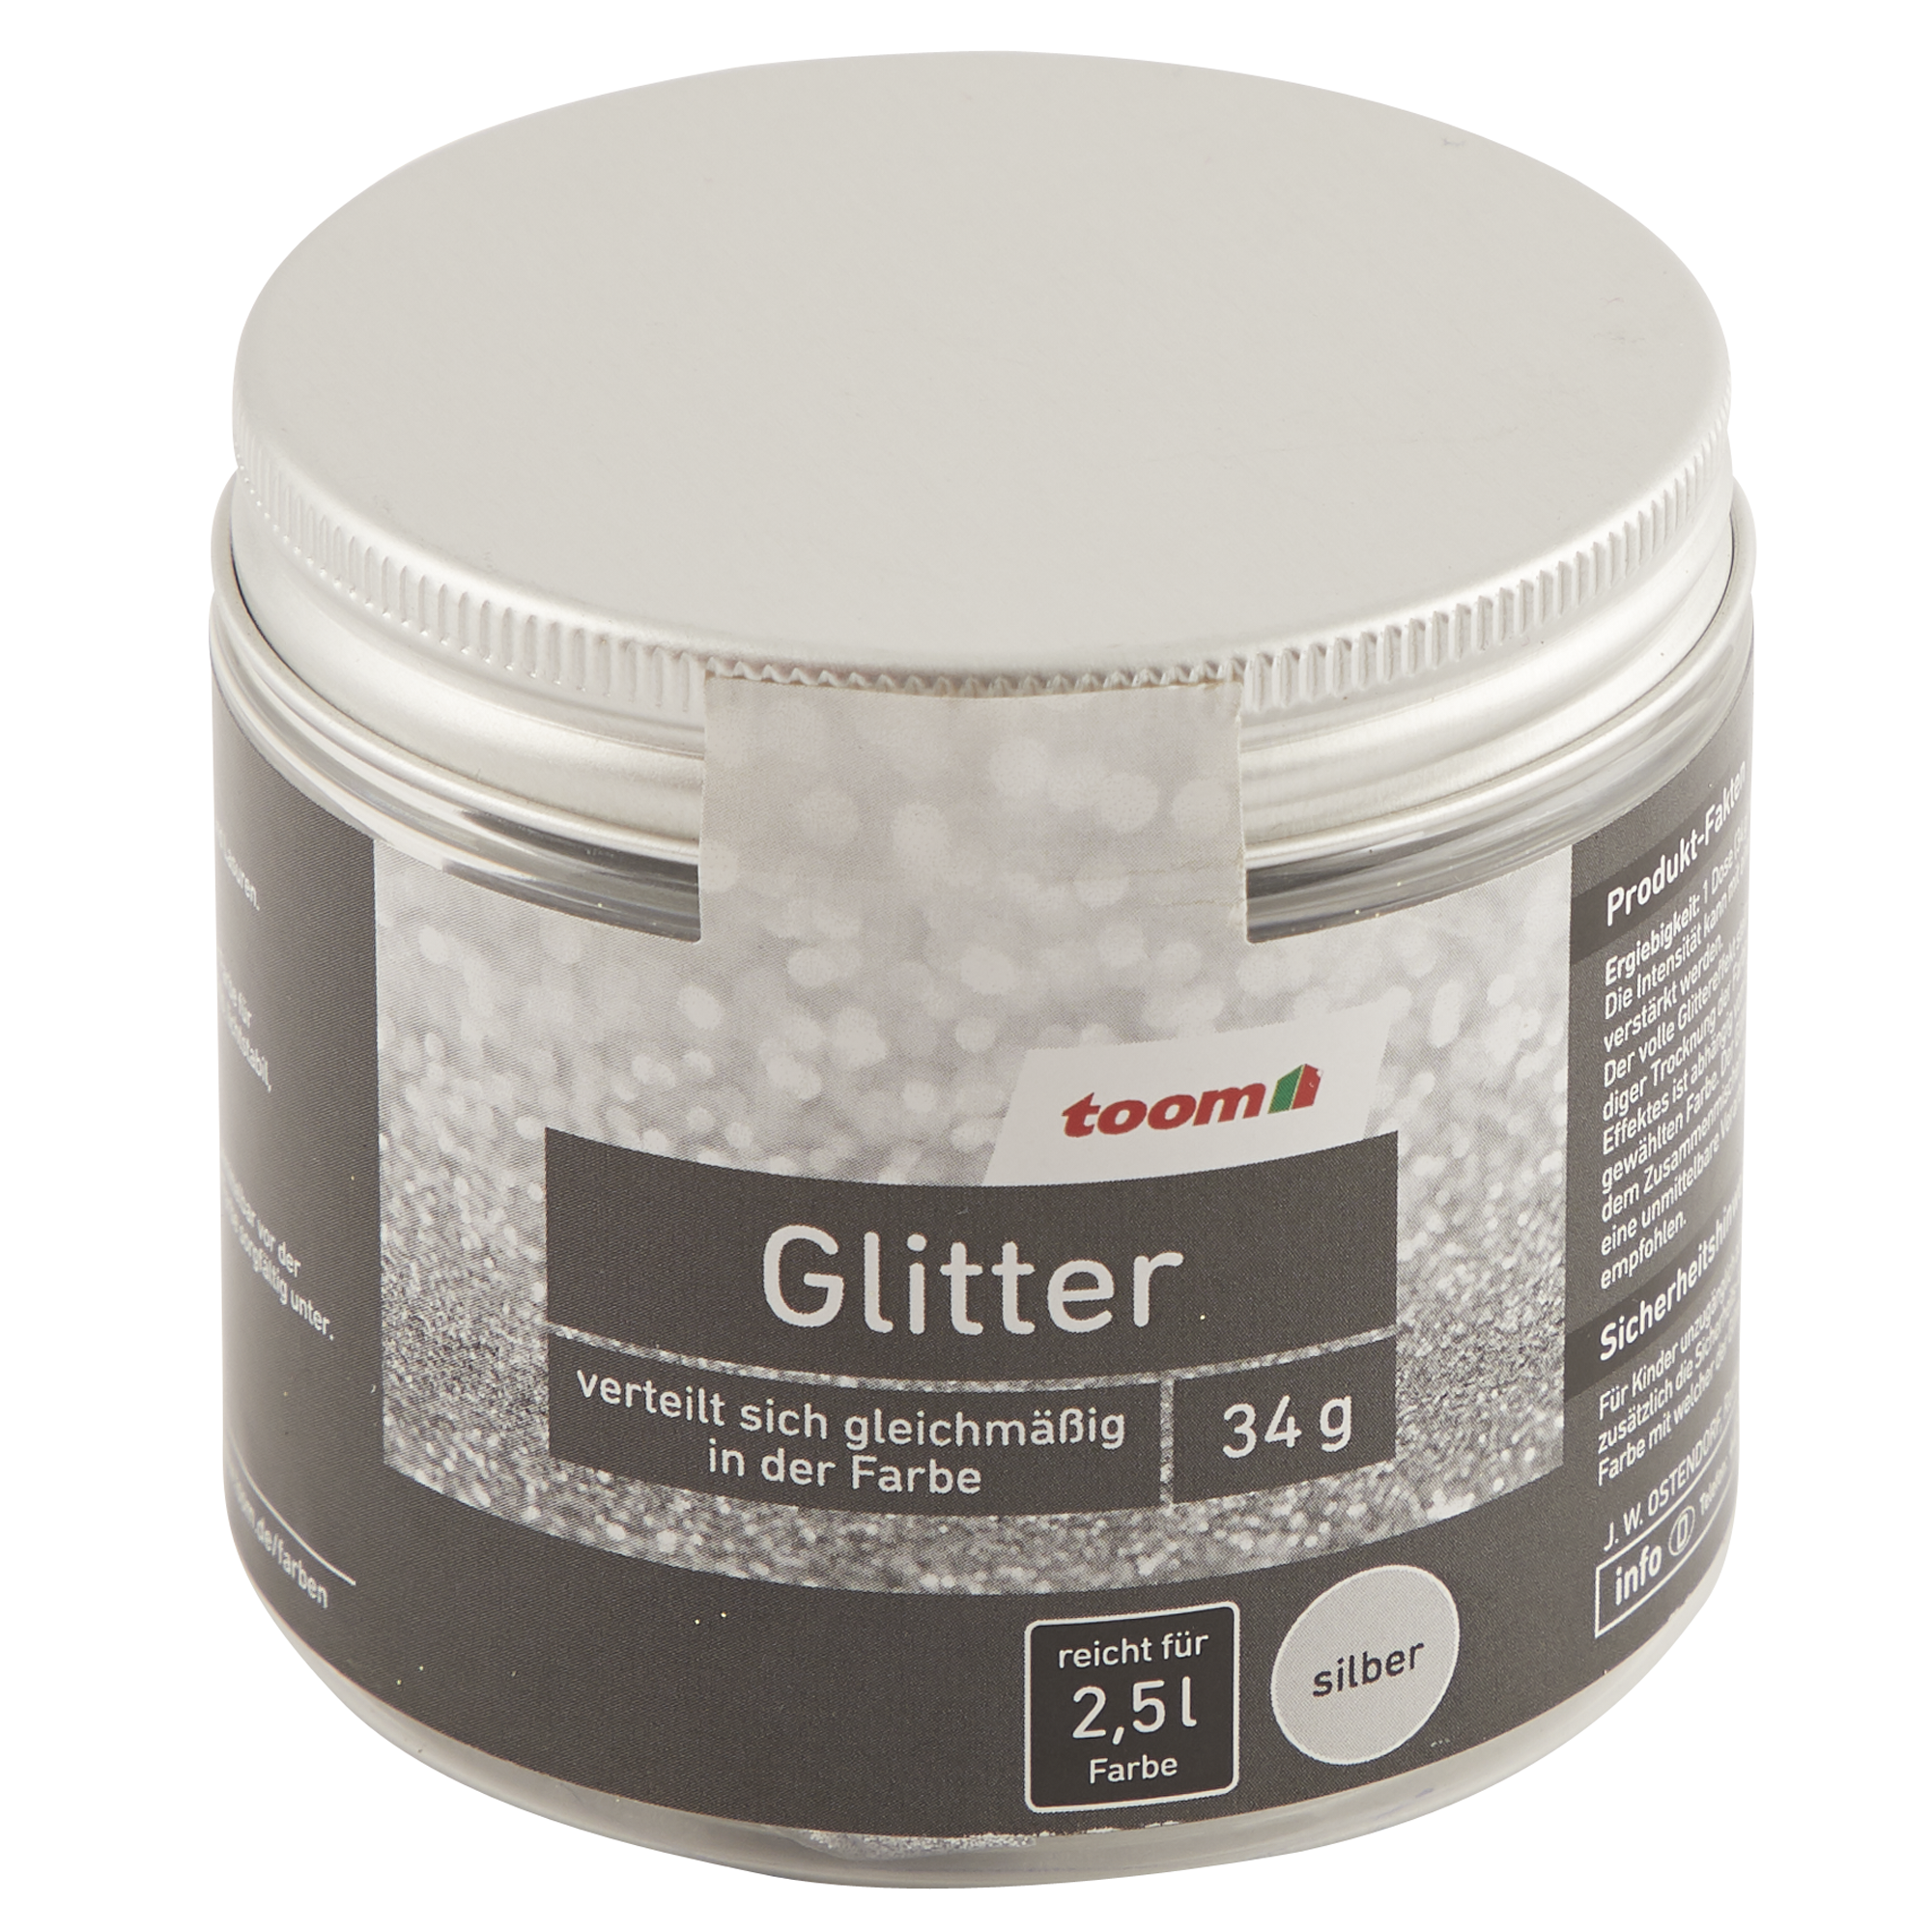 Glitter silber 34 g + product picture